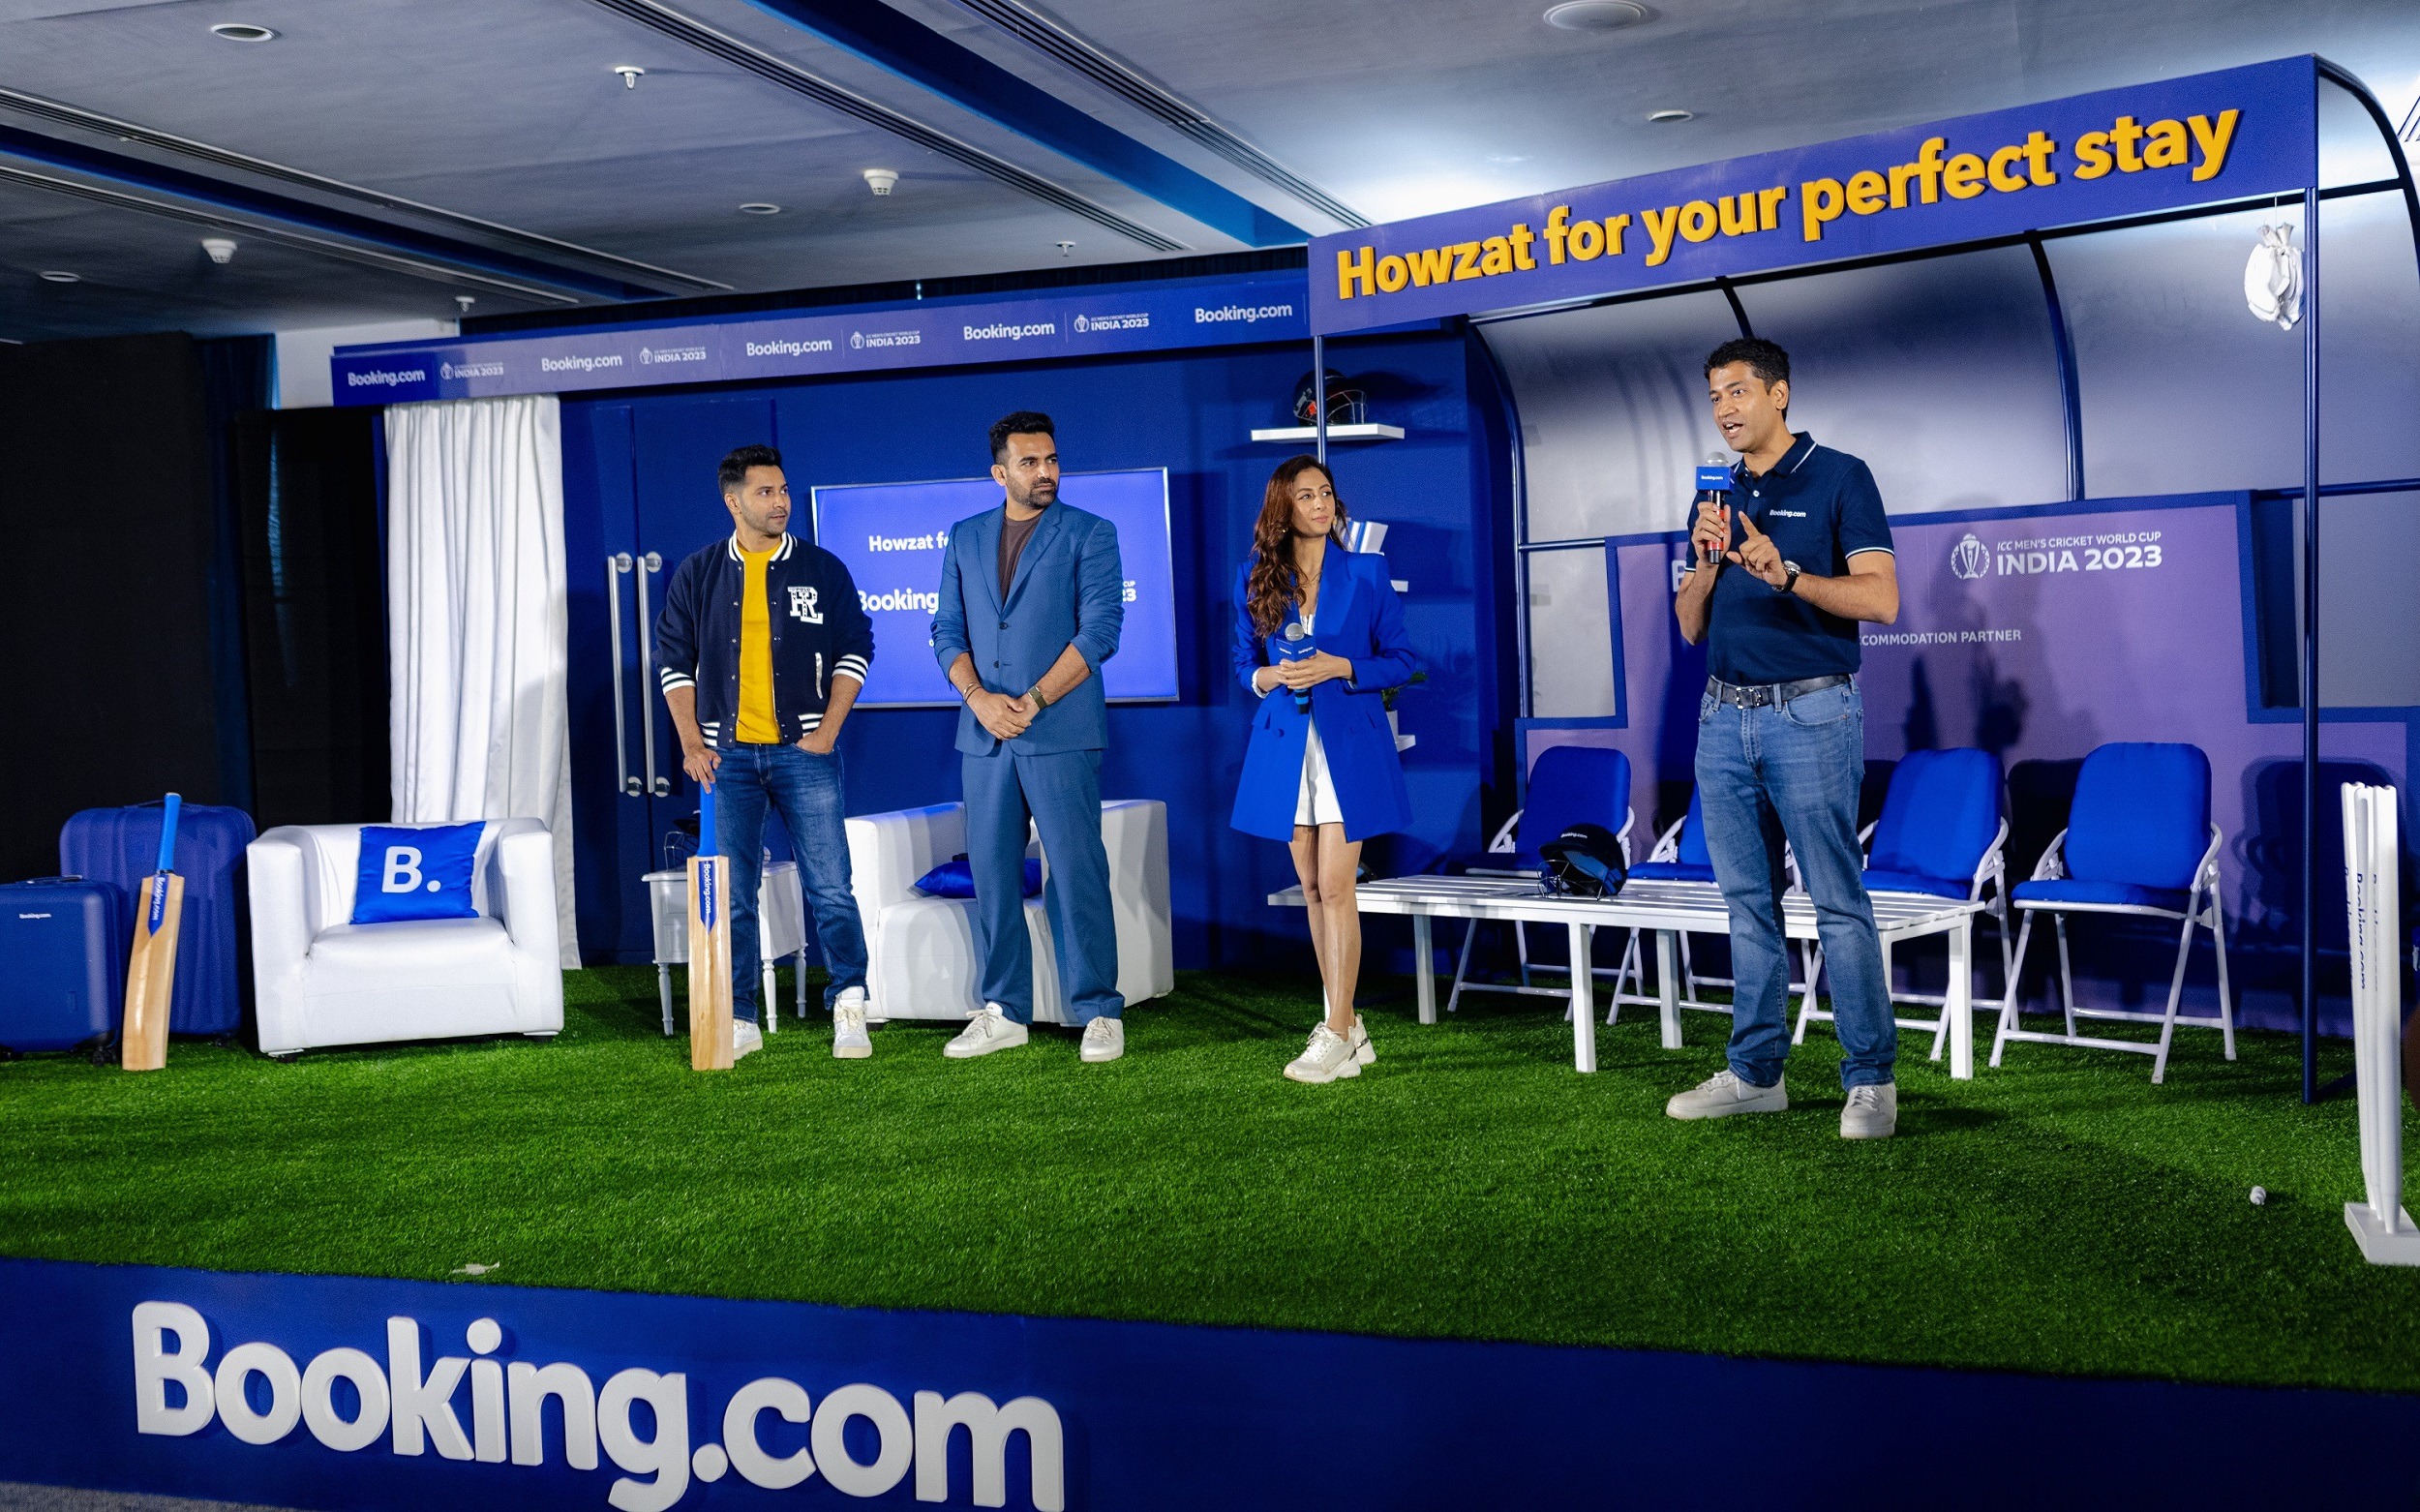 Booking.com launches ‘Howzat for Your Perfect Stay’ campaign for ICC Men’s Cricket World Cup